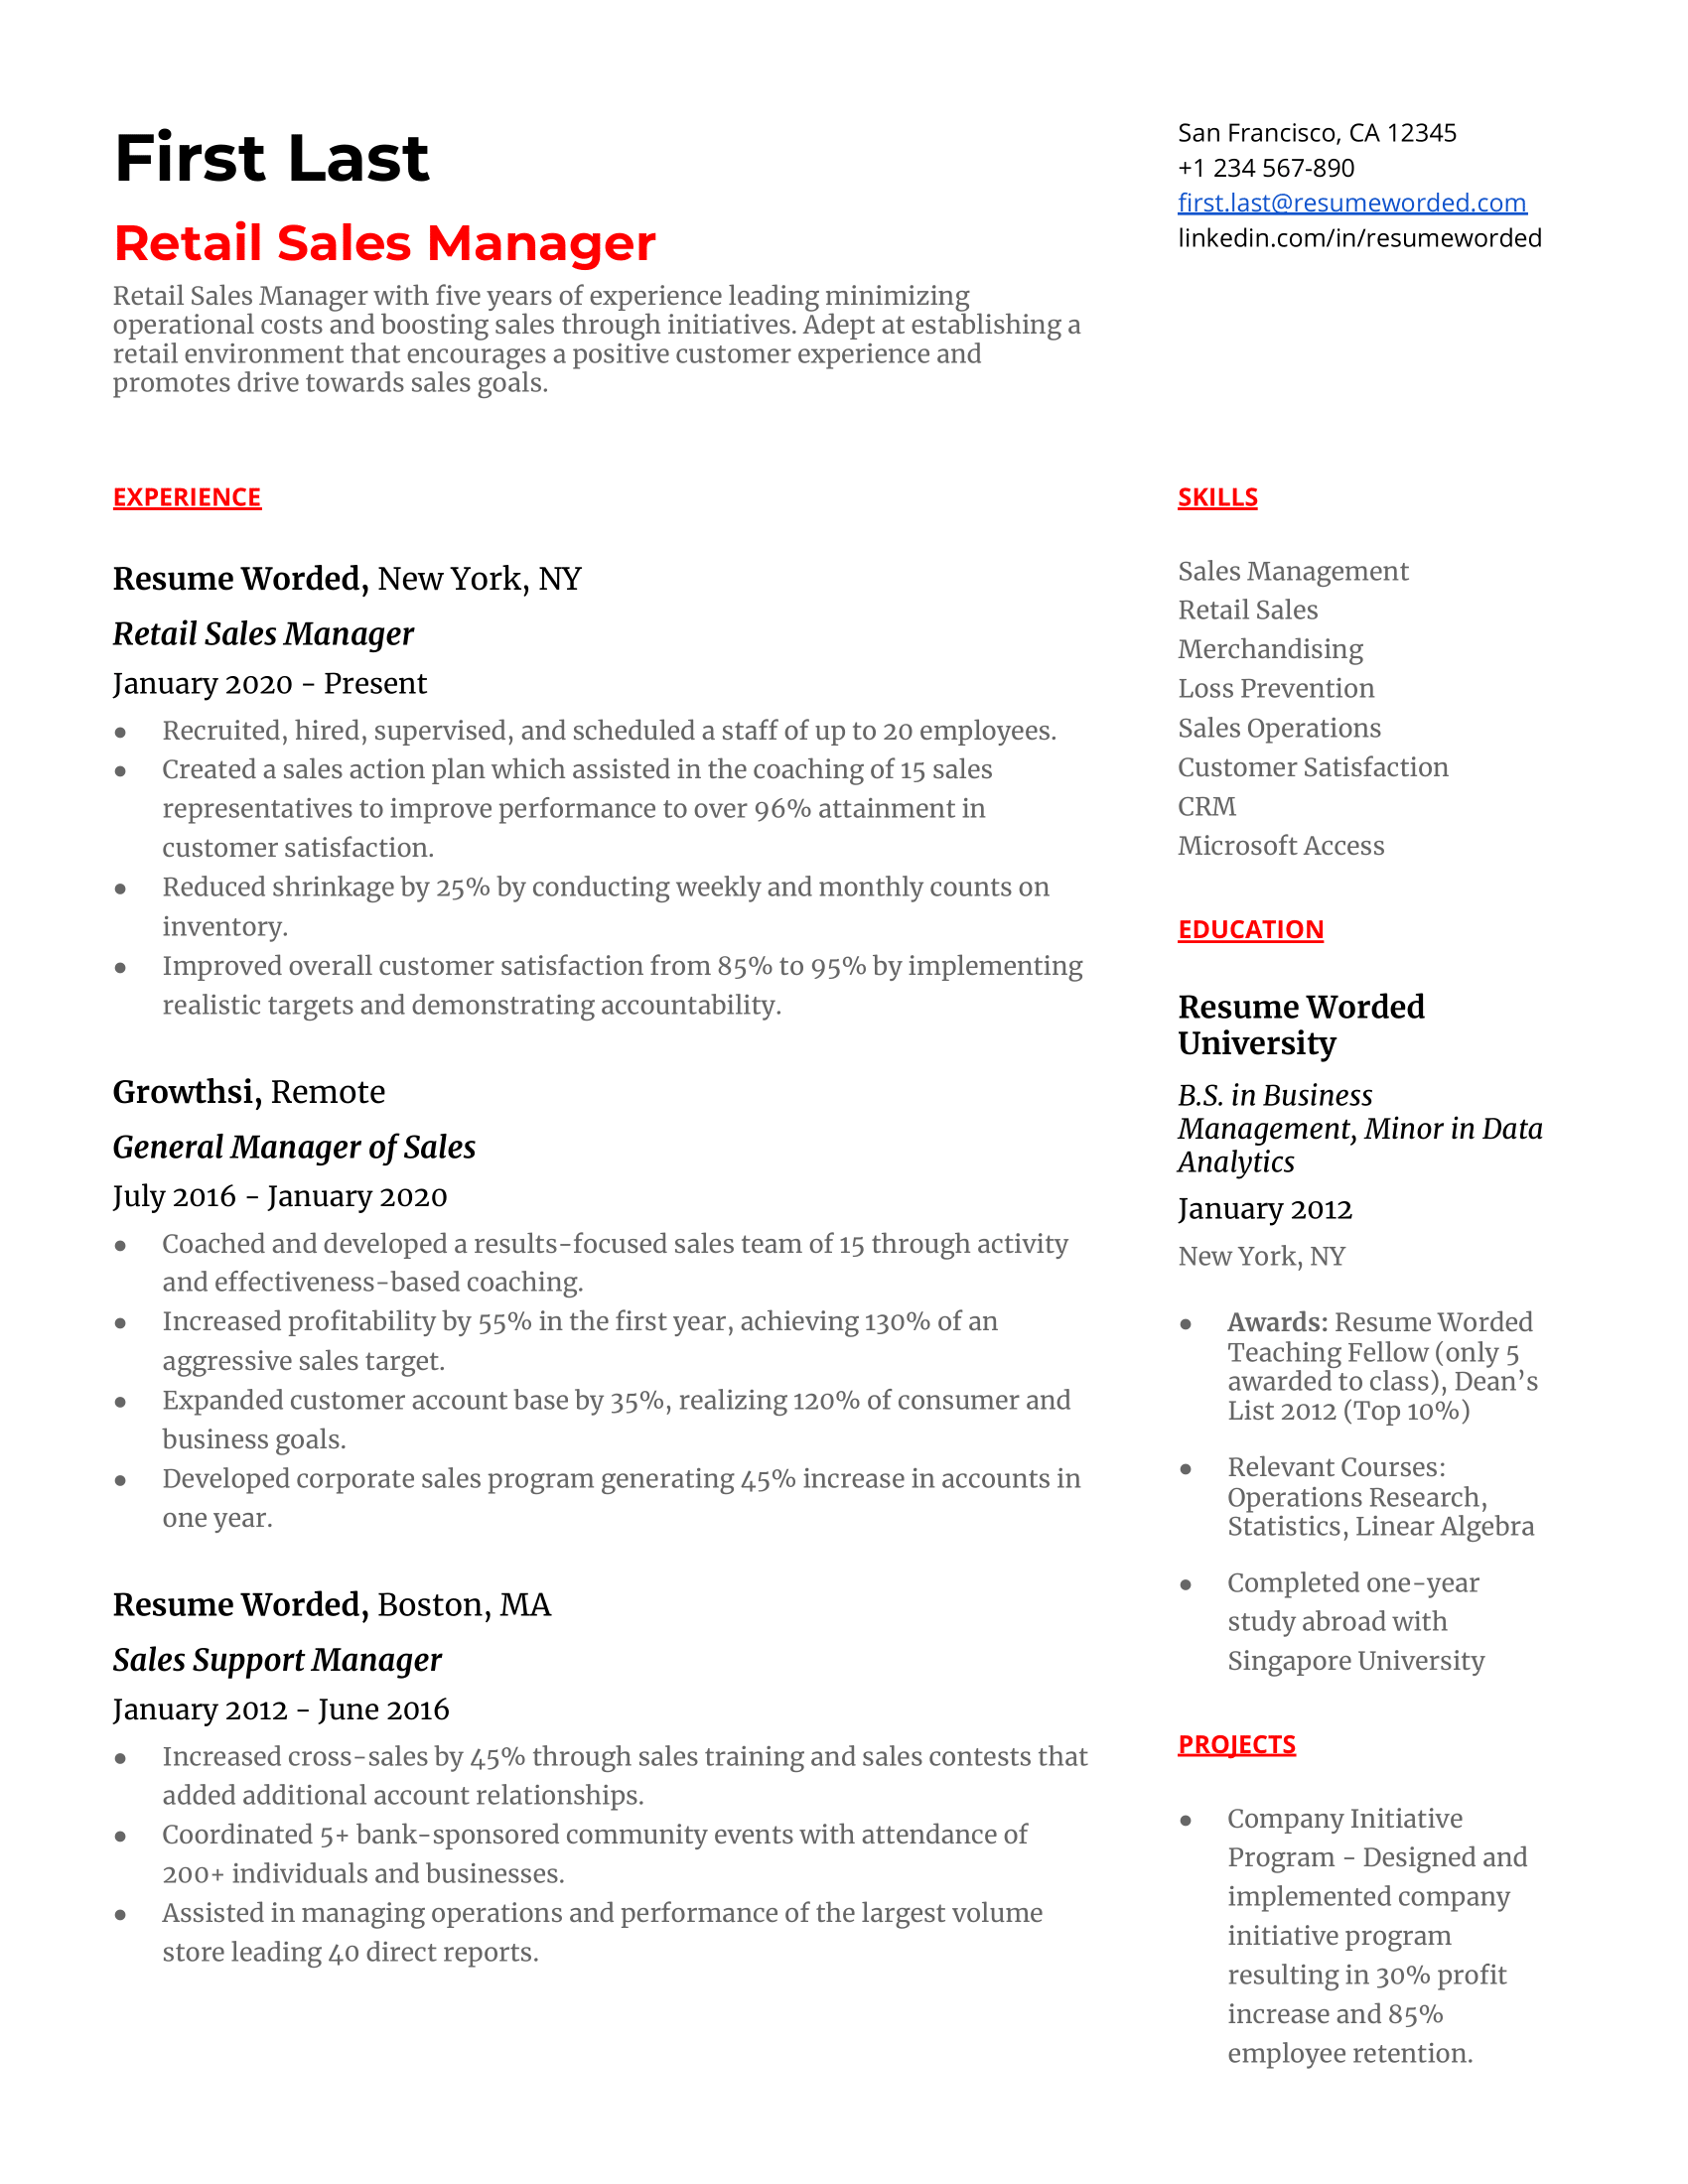 Retail Sales Manager Resume Template + Example